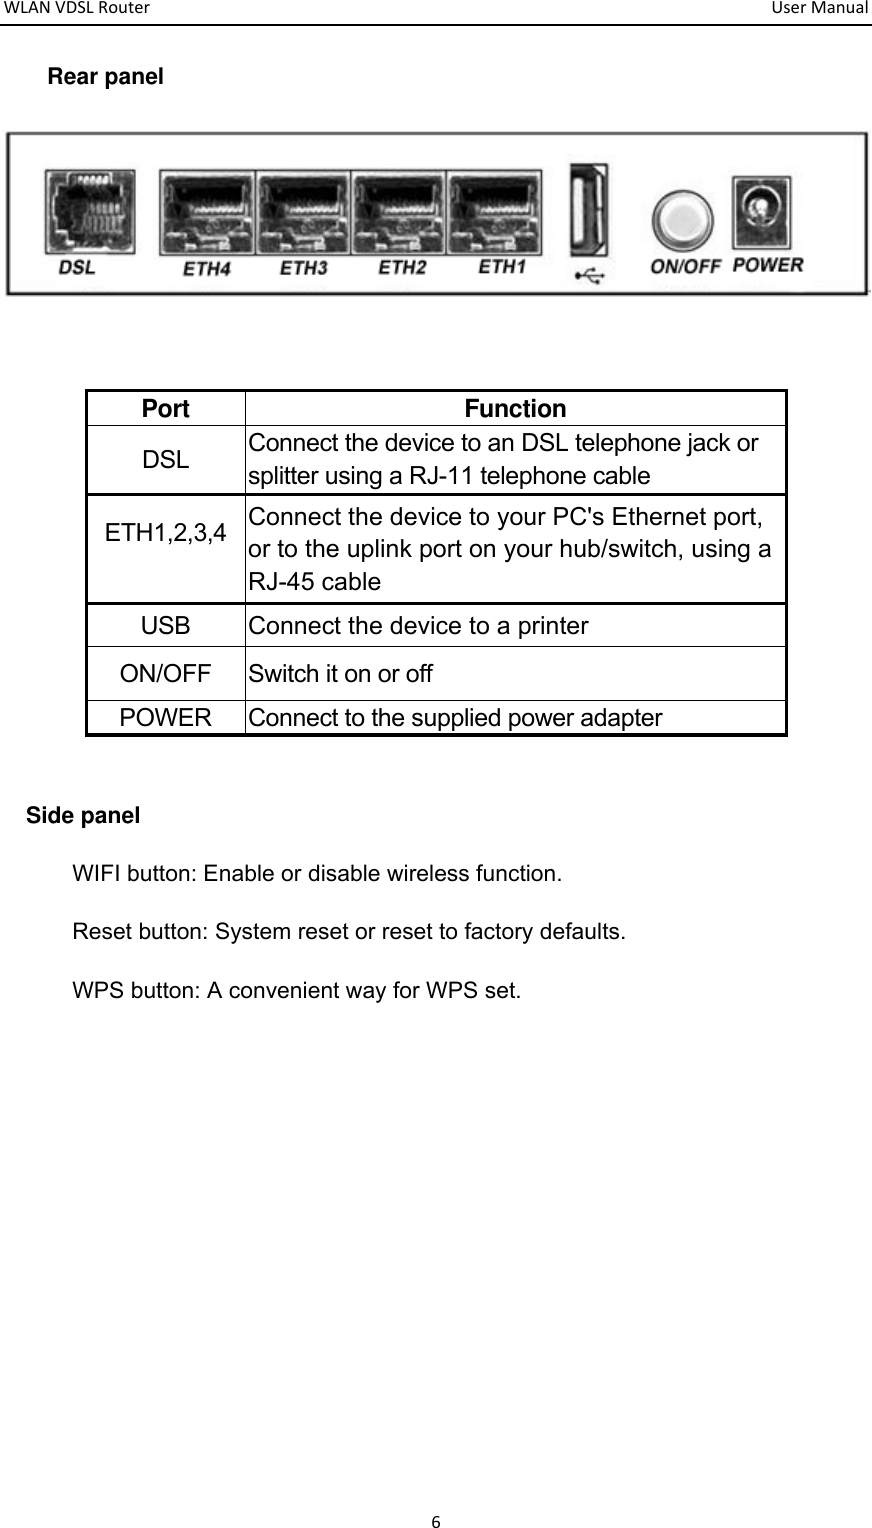 WLANVDSLRouter  UserManual6Rear panel          Side panel WIFI button: Enable or disable wireless function. Reset button: System reset or reset to factory defaults. WPS button: A convenient way for WPS set.        Port Function DSL  Connect the device to an DSL telephone jack or splitter using a RJ-11 telephone cable ETH1,2,3,4  Connect the device to your PC&apos;s Ethernet port, or to the uplink port on your hub/switch, using a RJ-45 cable USB  Connect the device to a printer ON/OFF Switch it on or off POWER  Connect to the supplied power adapter 